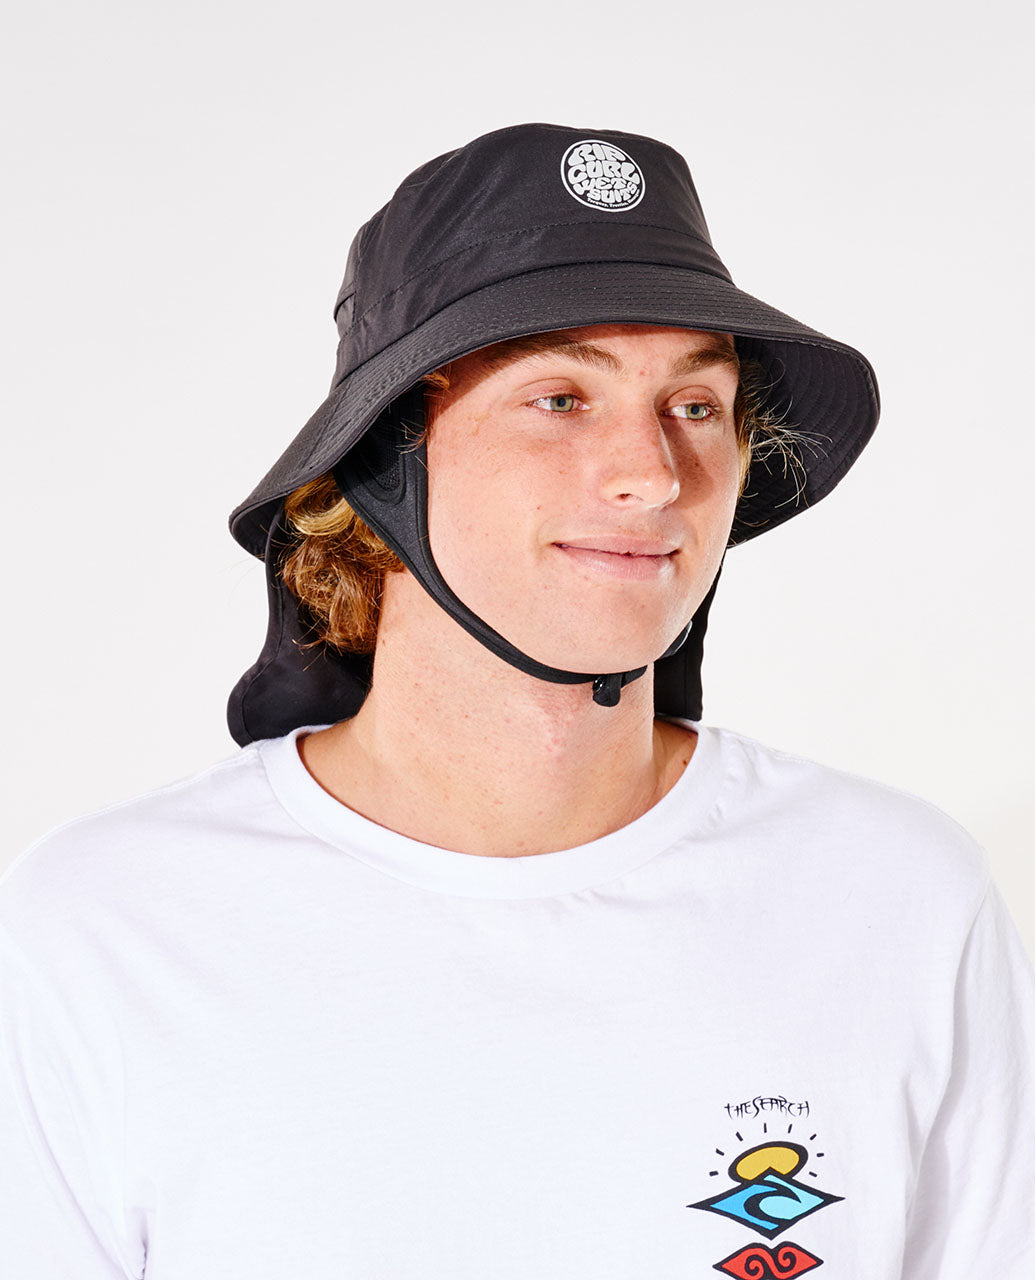 Surf Bucket Hat with Chin Straps for Surfing, SUP, and Watersports :  : Sports & Outdoors